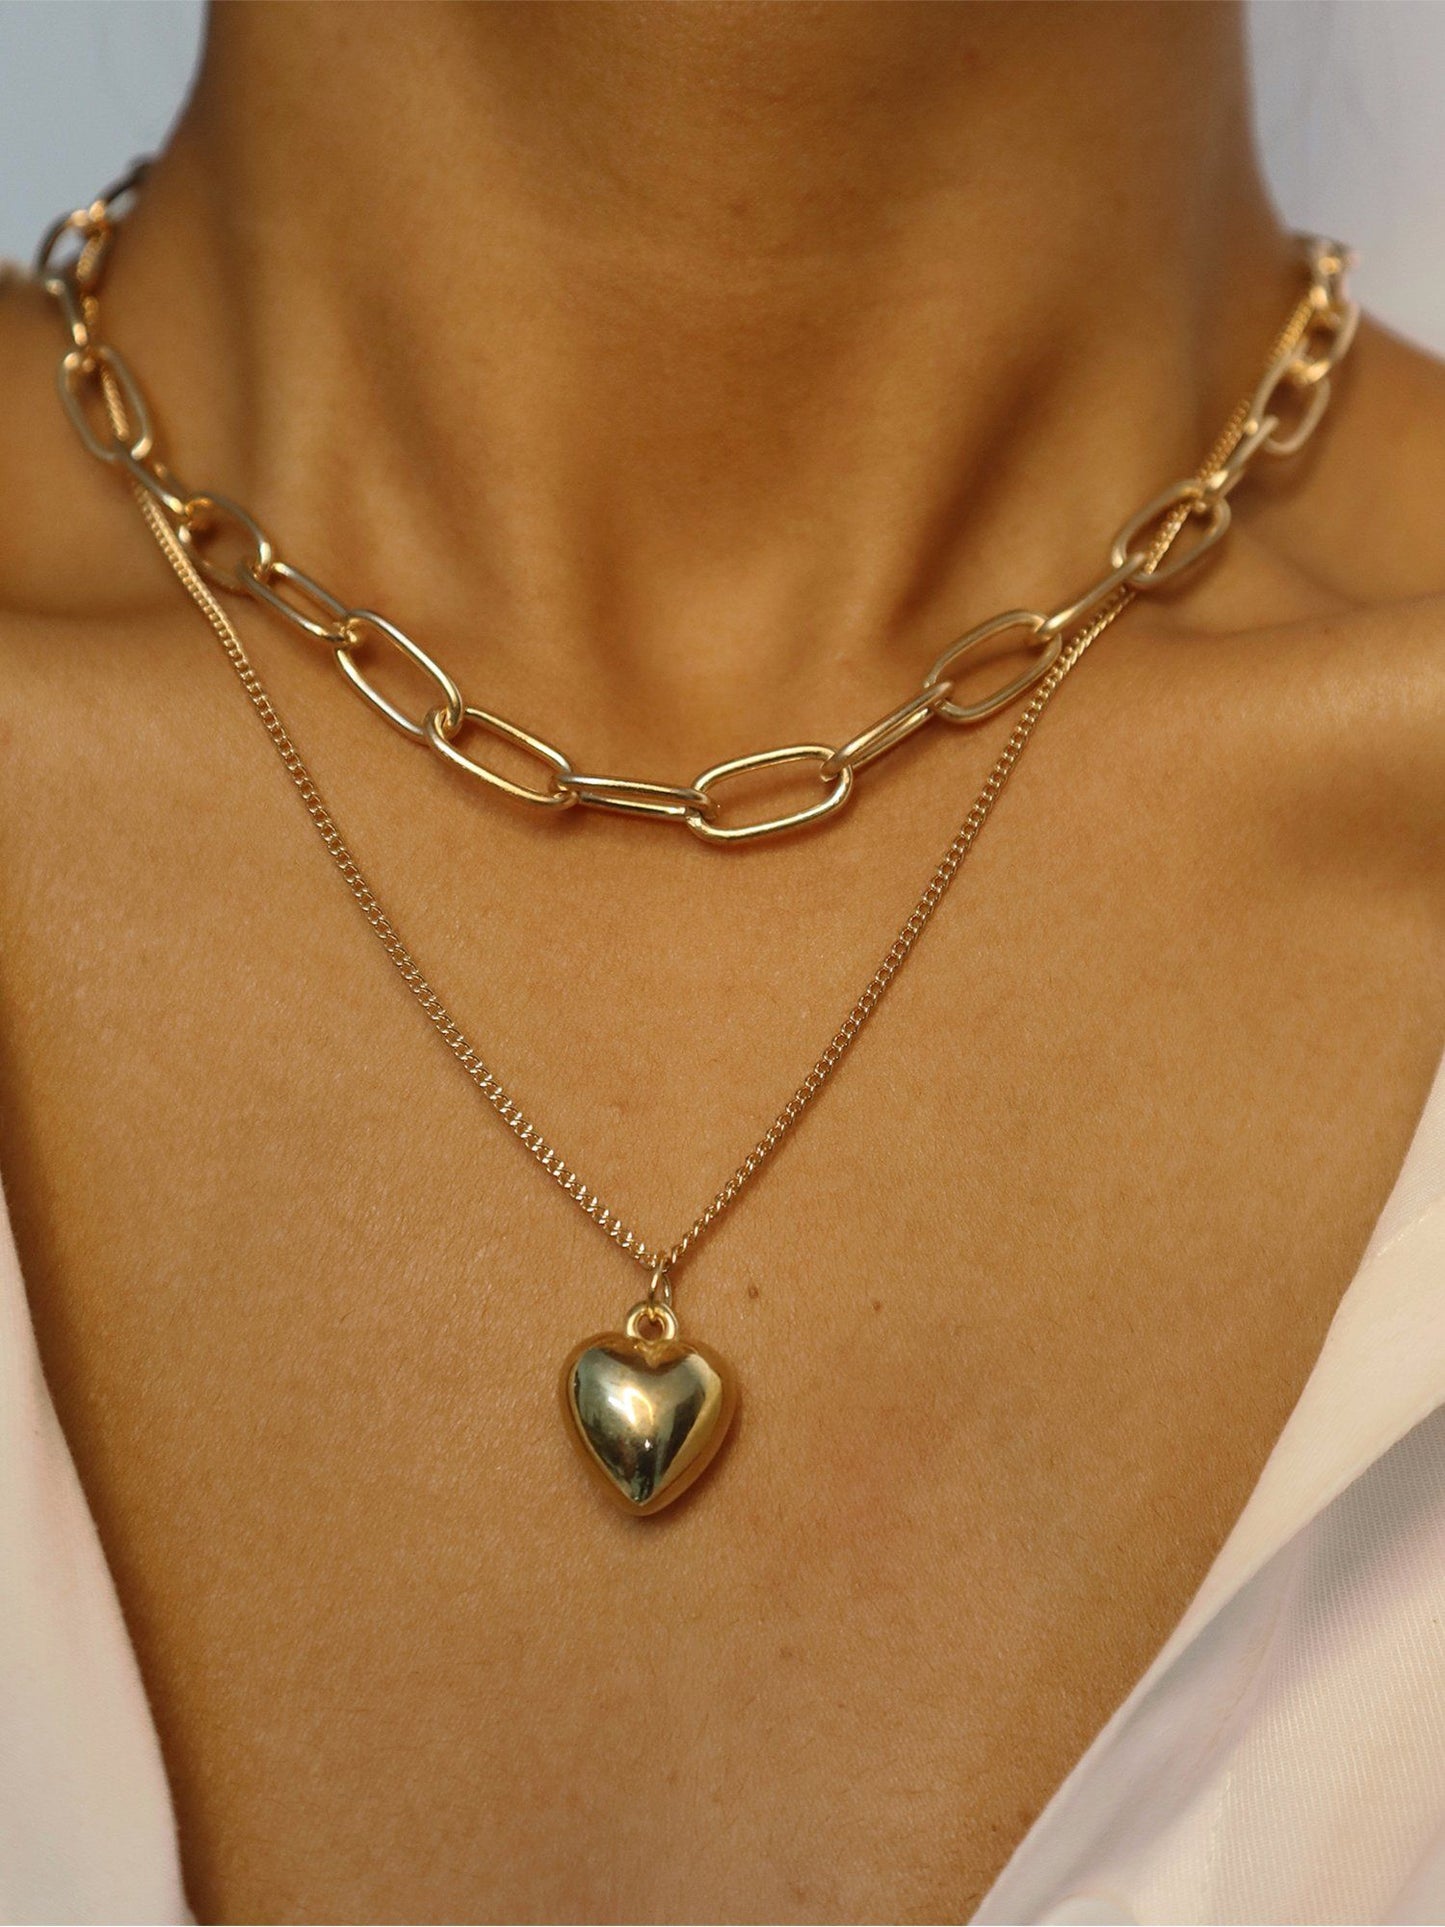 Gold Plated Link Chain Layered Necklace with Heart Pendant